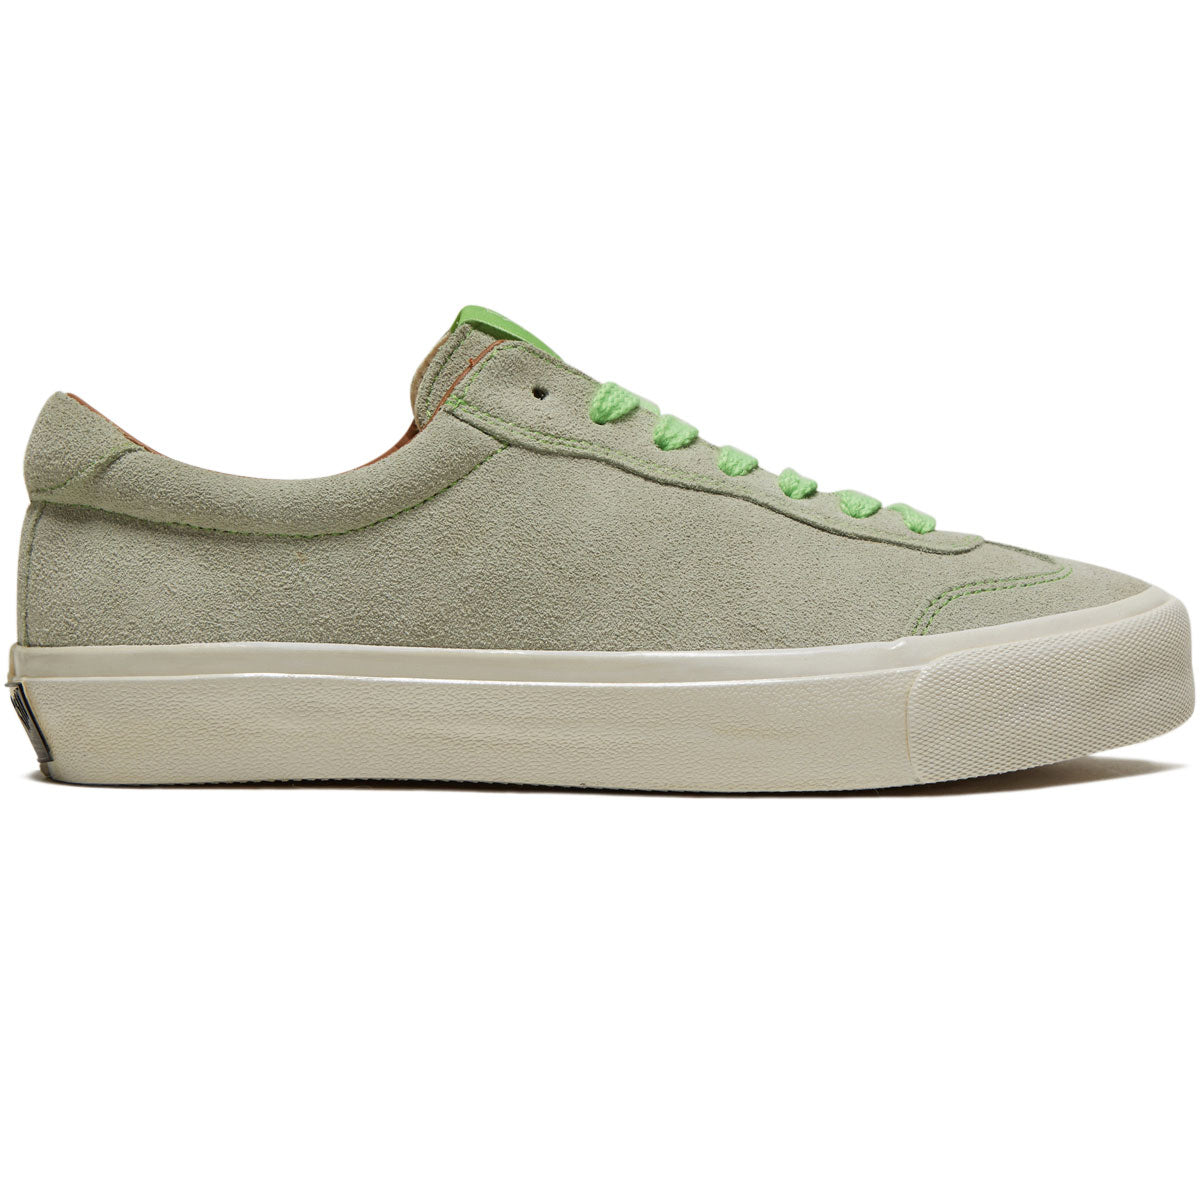 Last Resort AB VM004 Milic Suede Shoes - Green Tint/White image 1